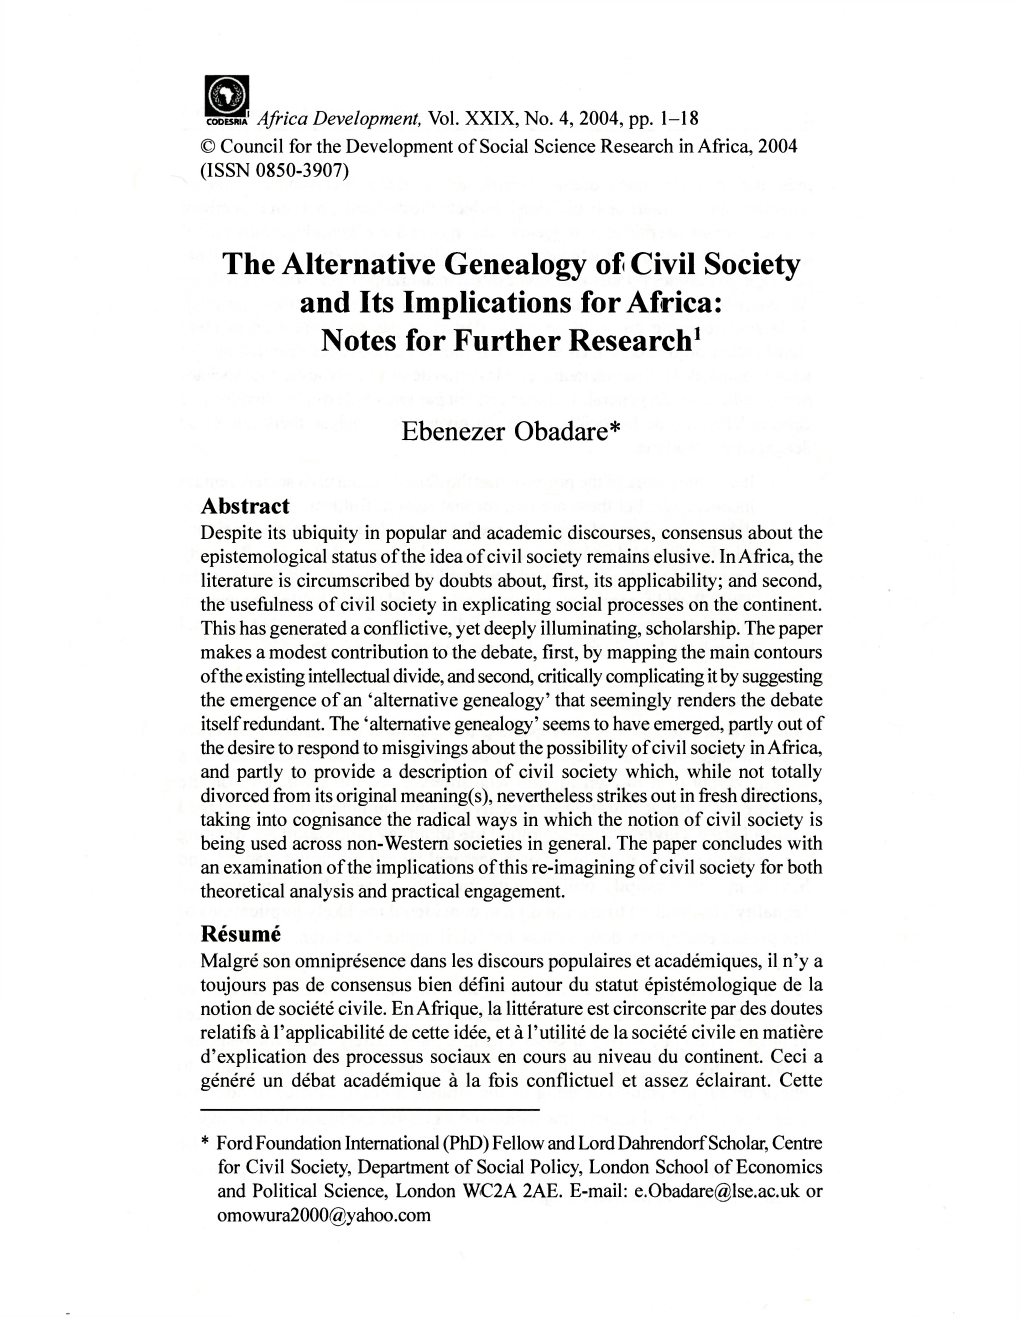 The Alternative Genealogy of Civil Society and Its Implications for Africa: Notes for Further Research1